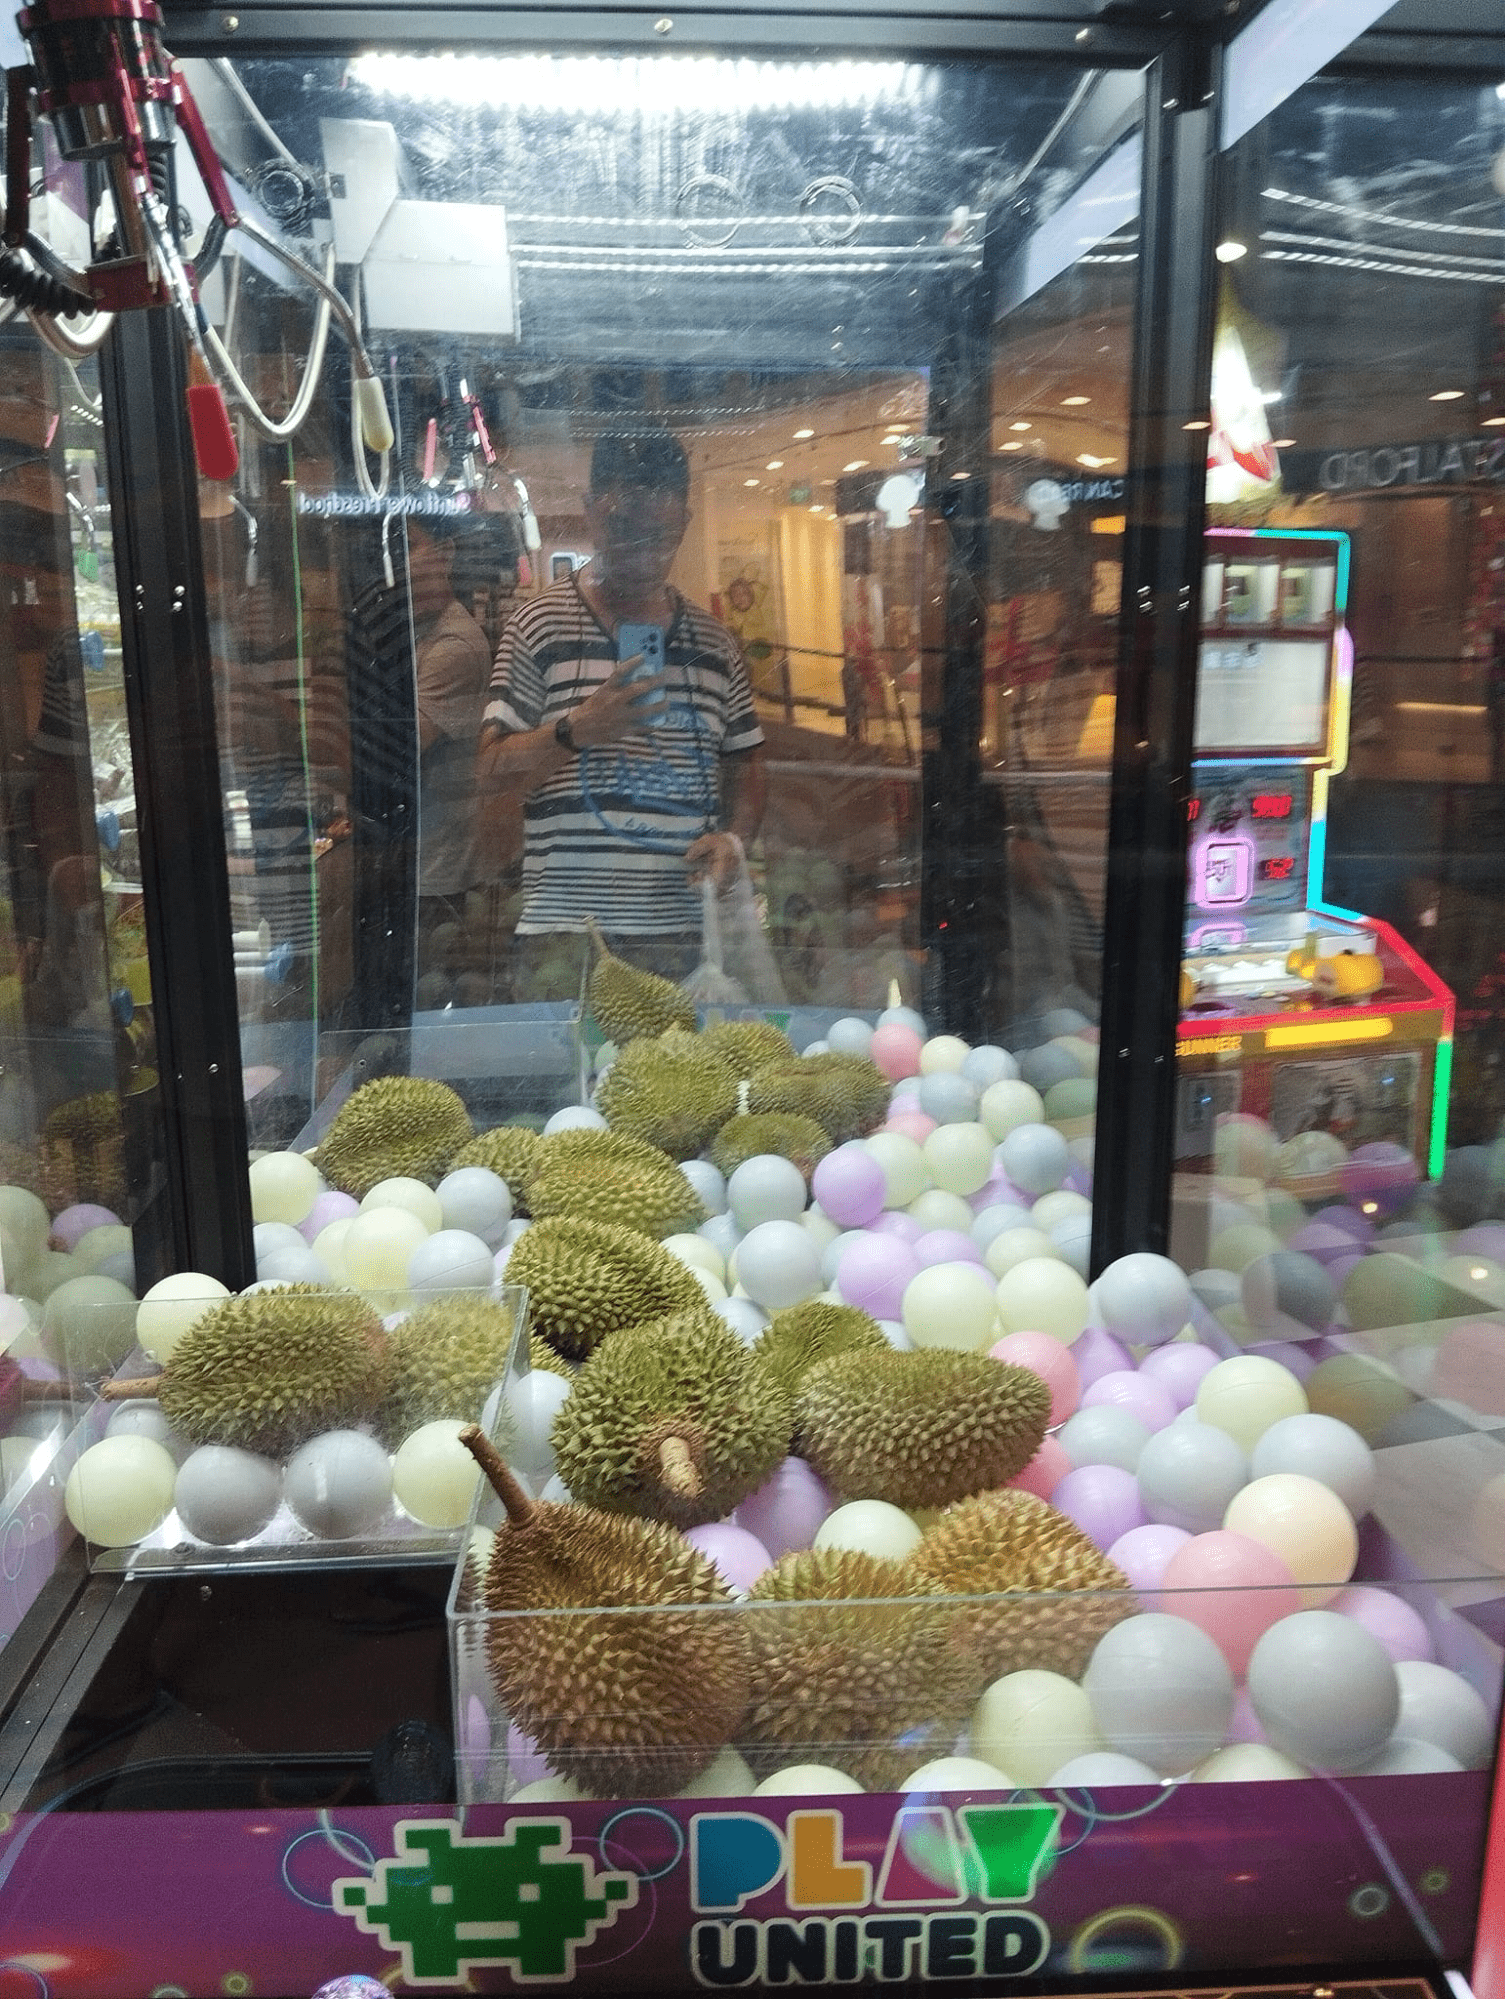 claw machine - play unlimited durian